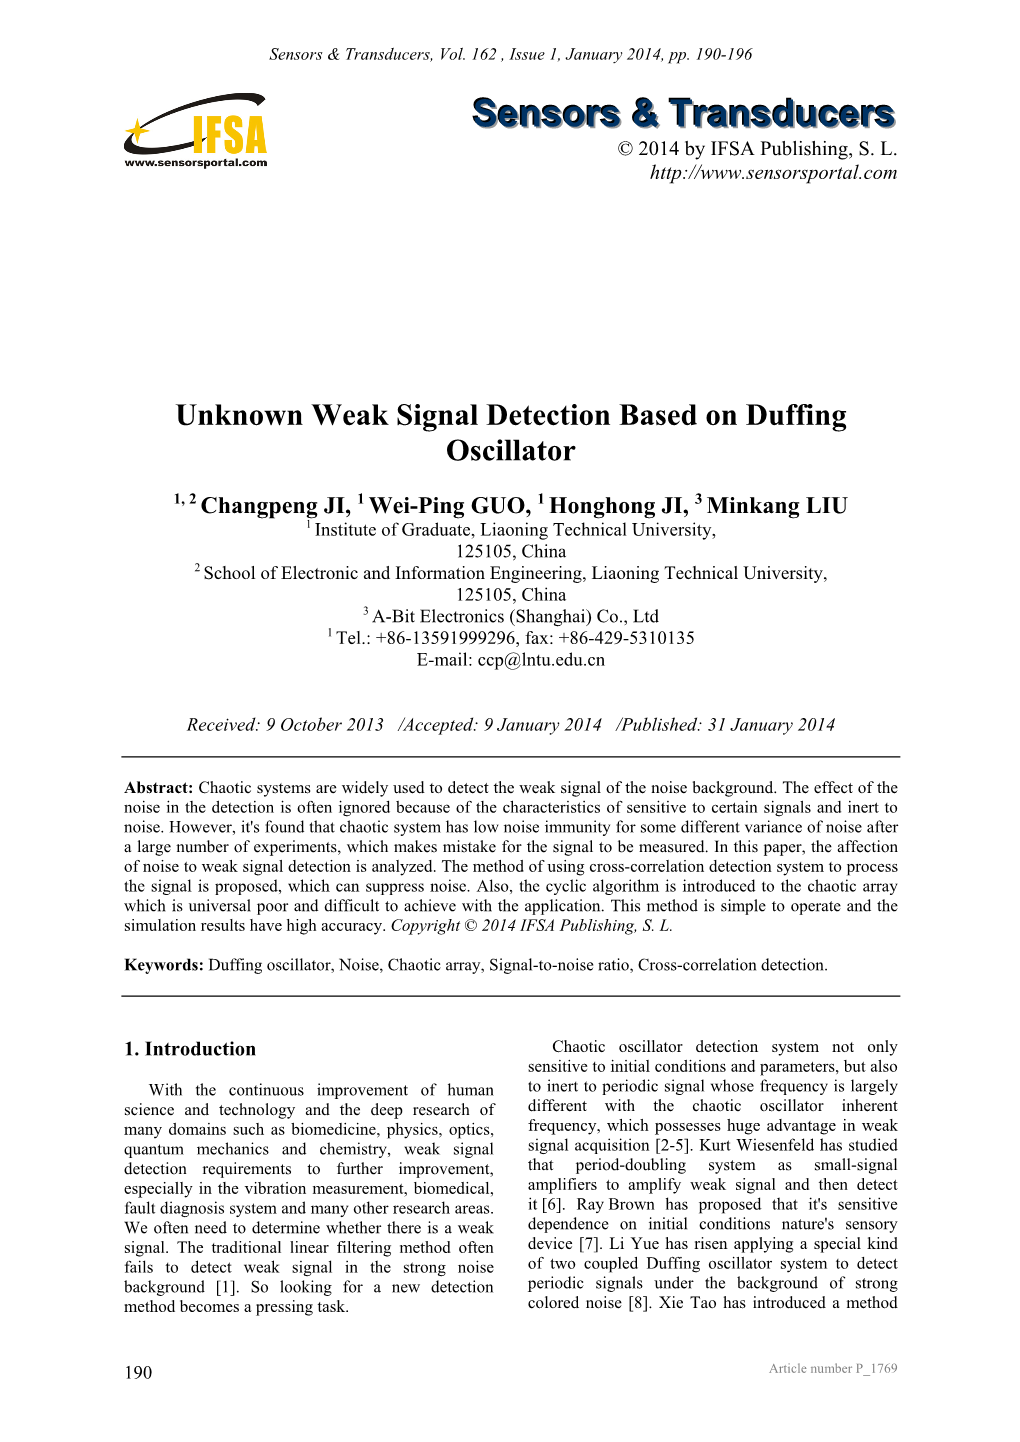 Unknown Weak Signal Detection Based on Duffing Oscillator